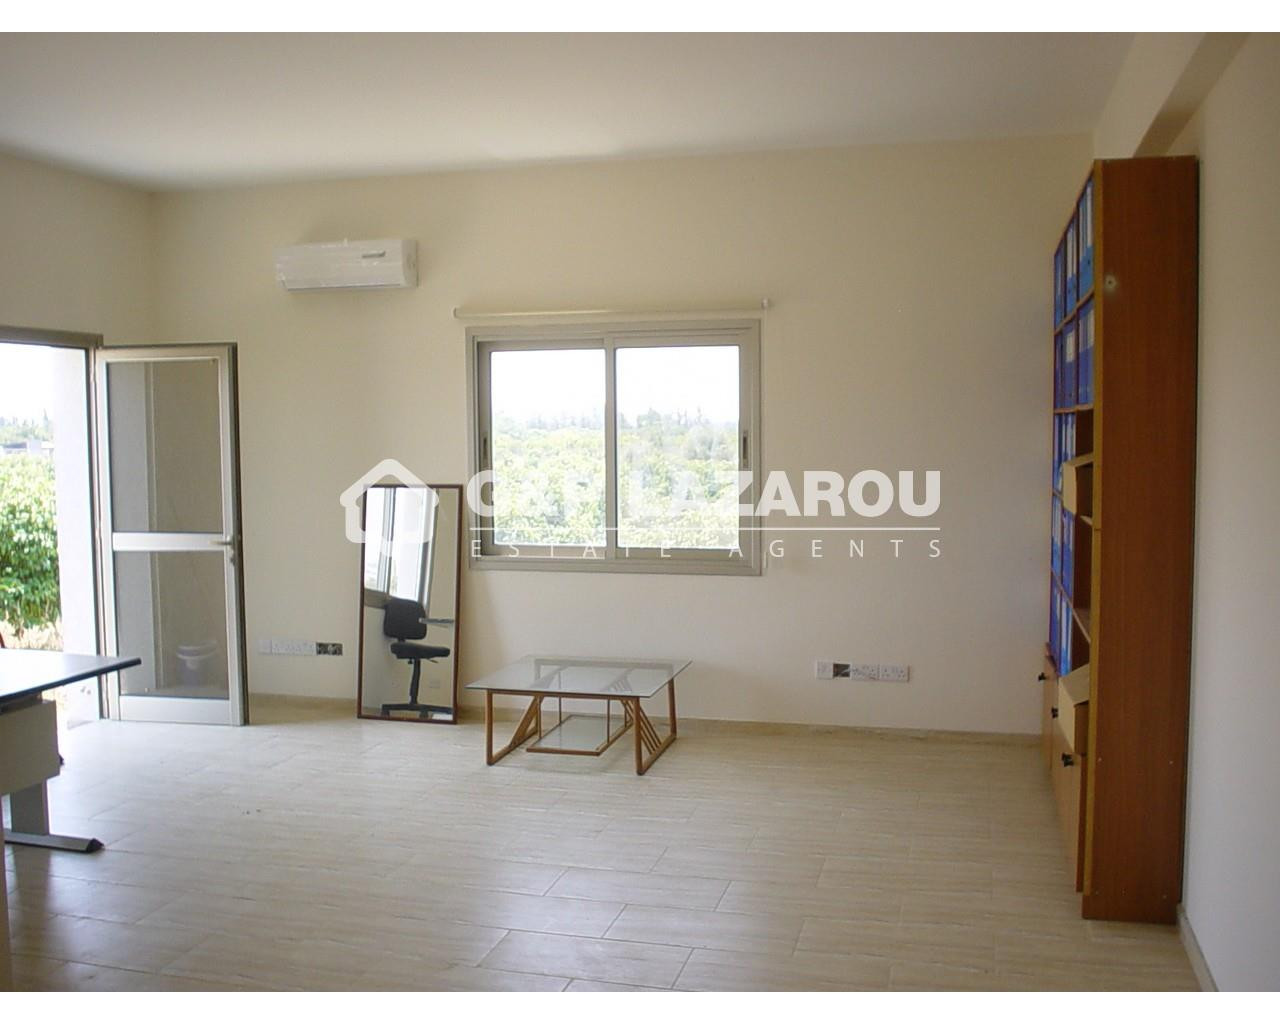 5 Bedroom House for Sale in Asomatos, Limassol District